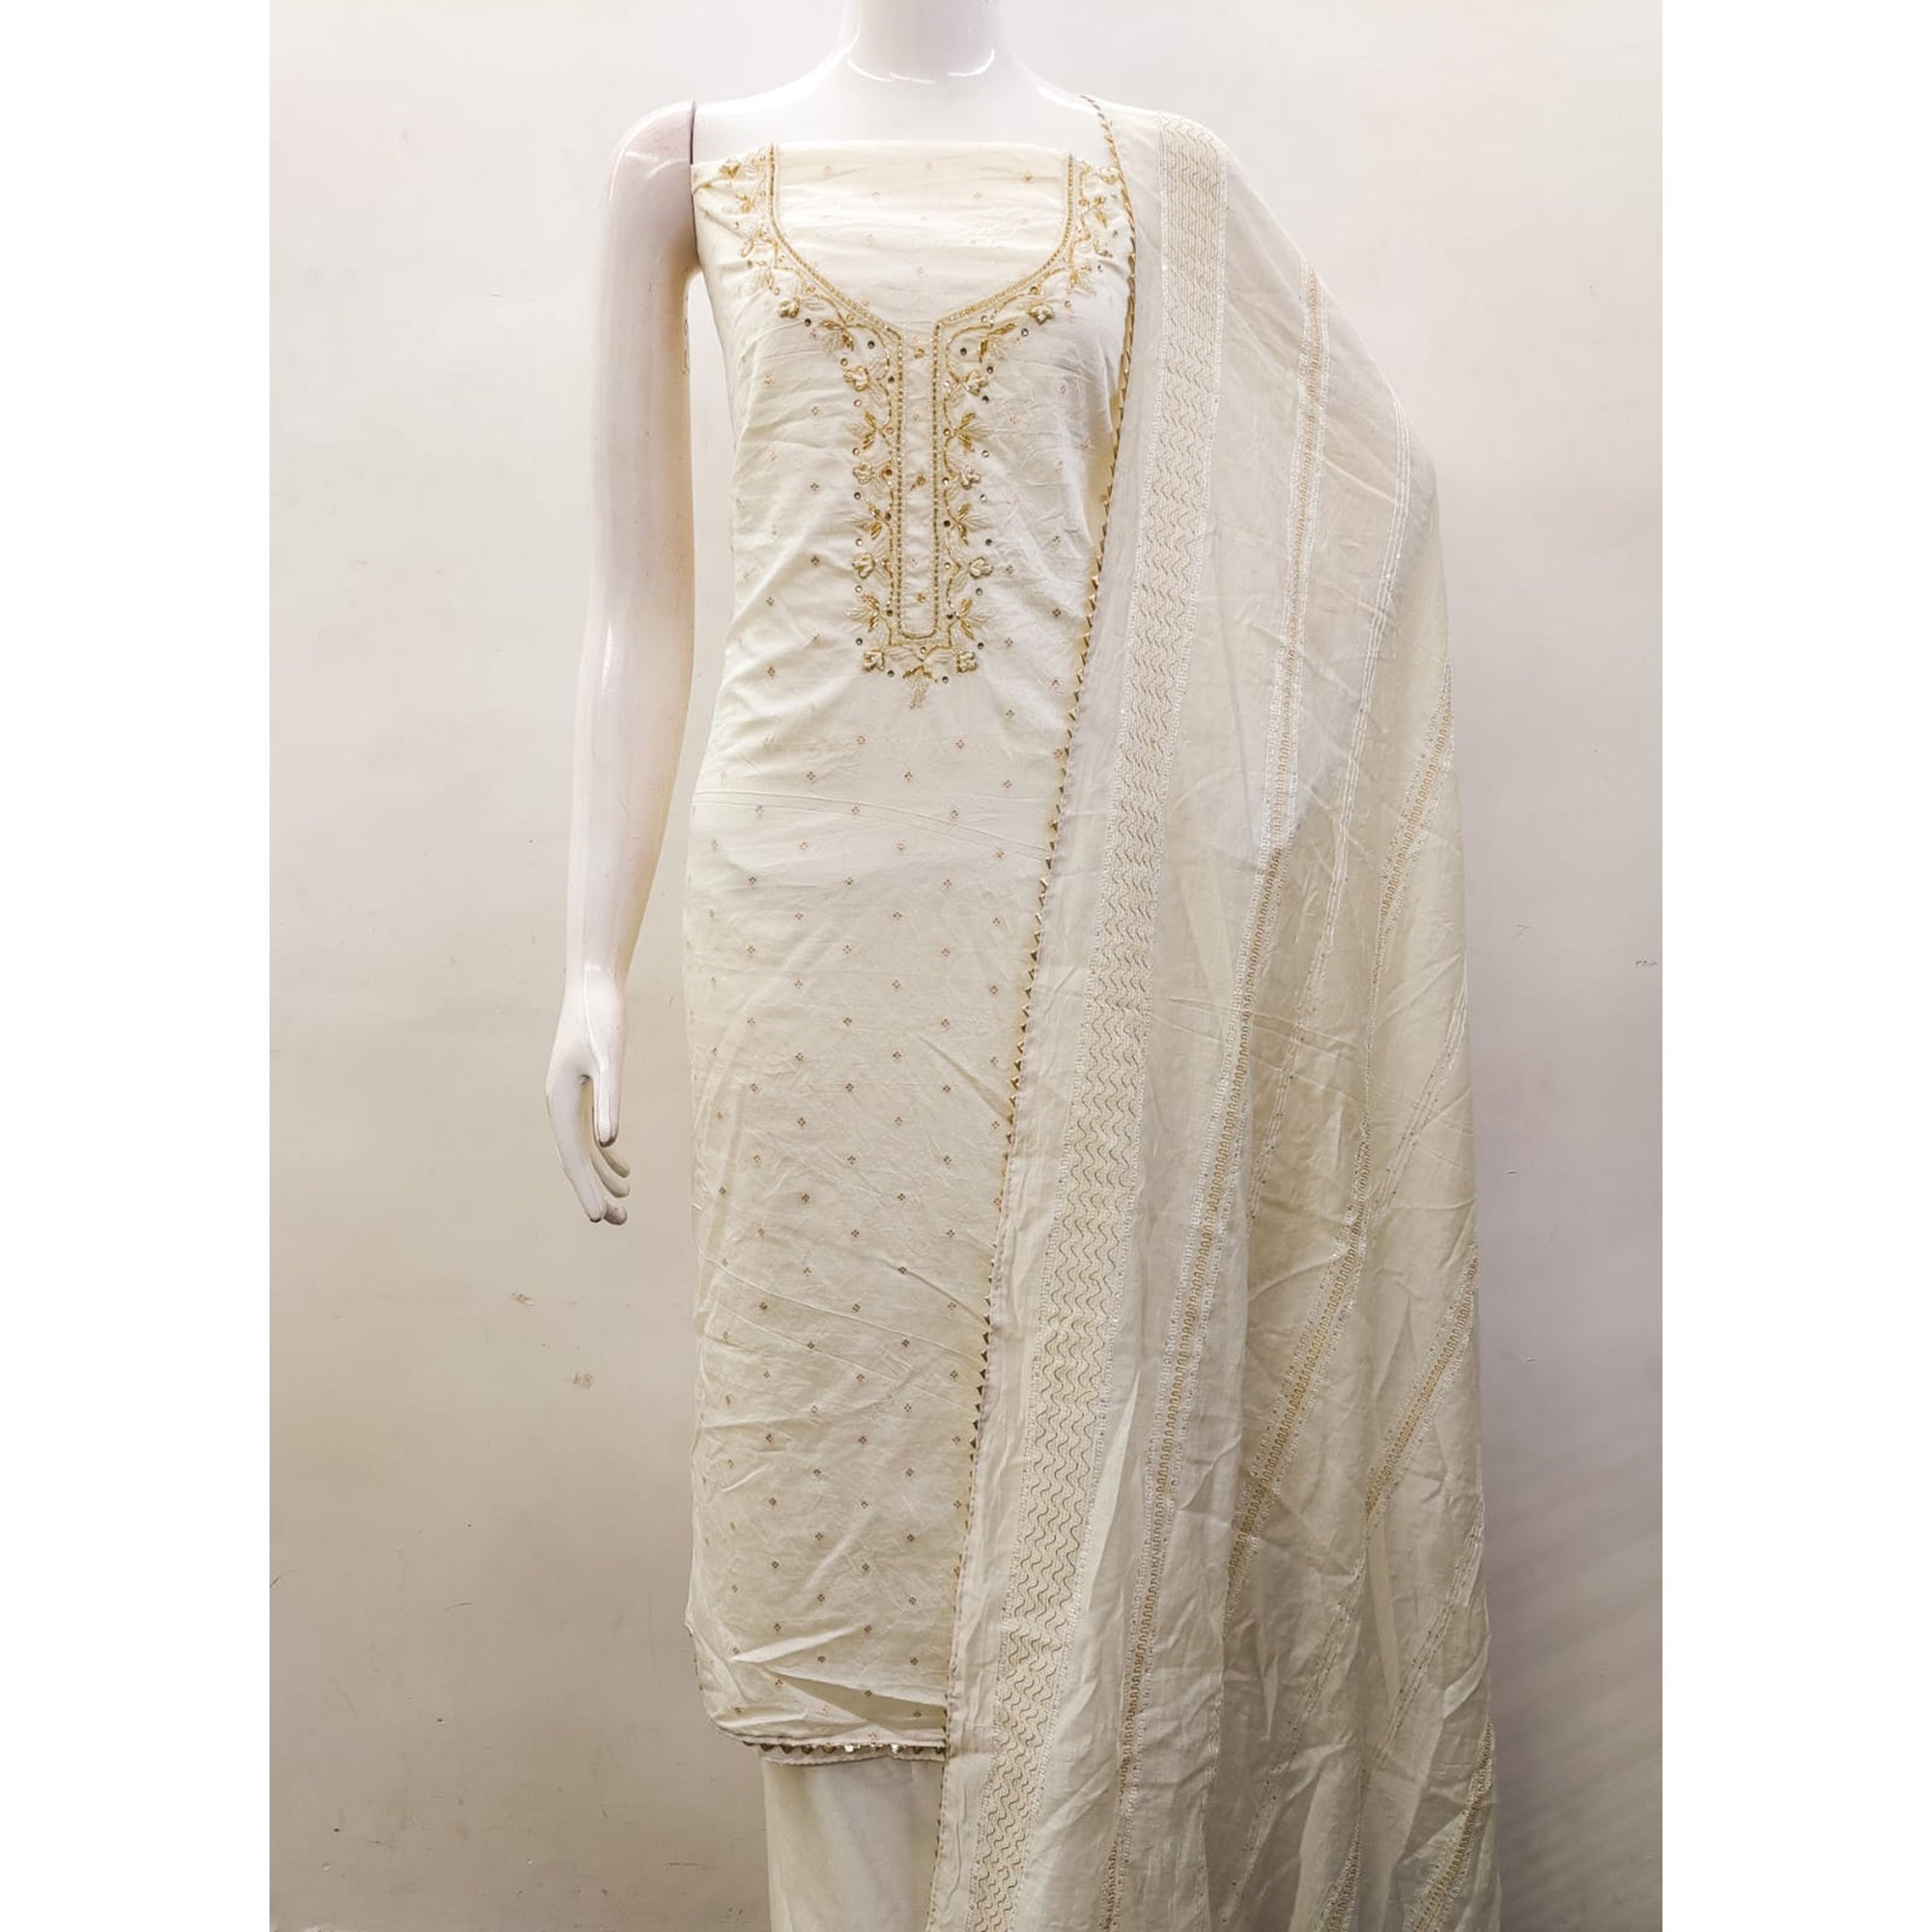 White Butti With Hand Embroidered Jacquard Dress Material